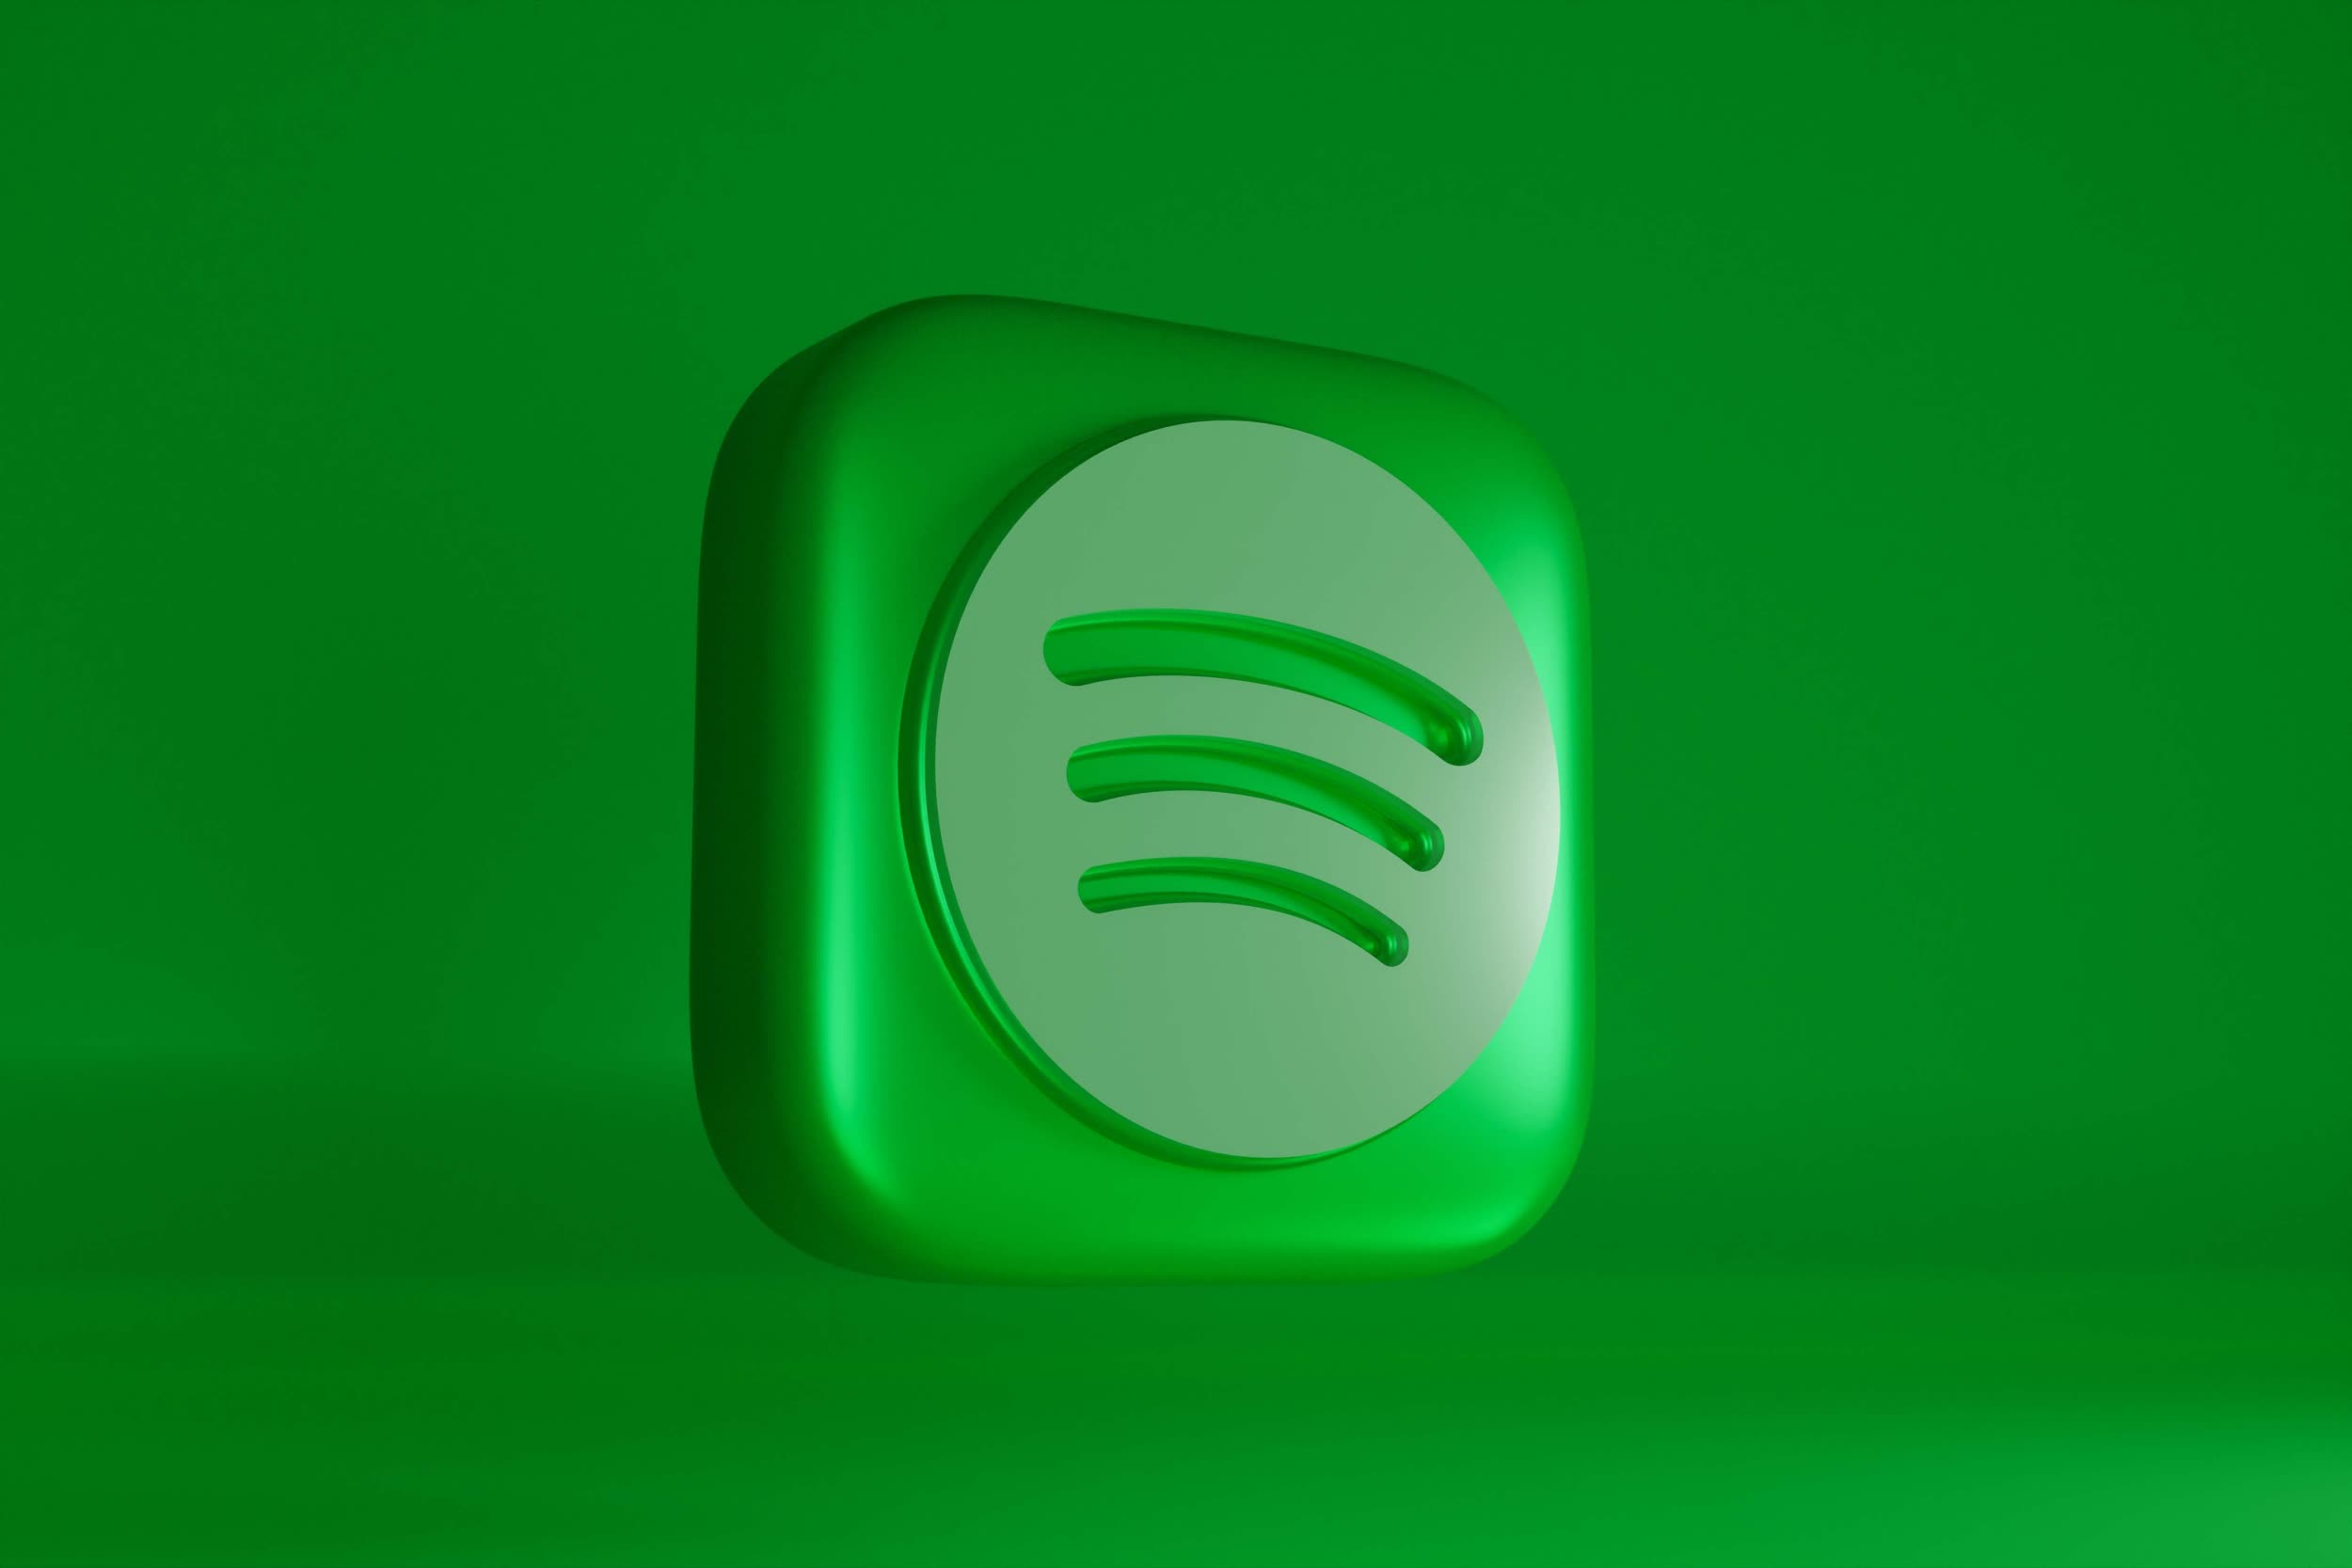 Spotify is offering three months of free Premium service to new subscribers